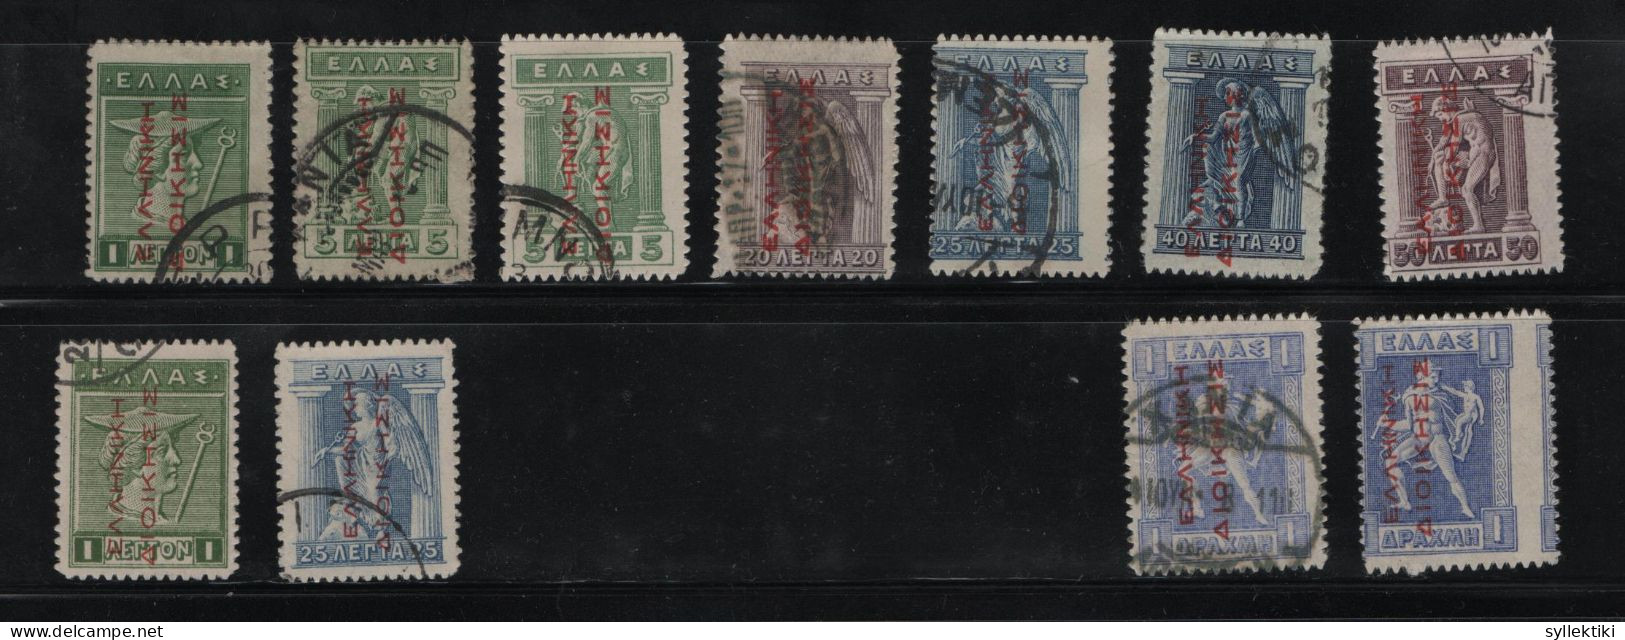 GREECE 1913 GREEK ADMIN READING UP RED & CARMIN 1 LEPTON - 1 DRACHMA 11 USED STAMPS  HELLAS No 271 - 278, 290, 295 AND V - Usados